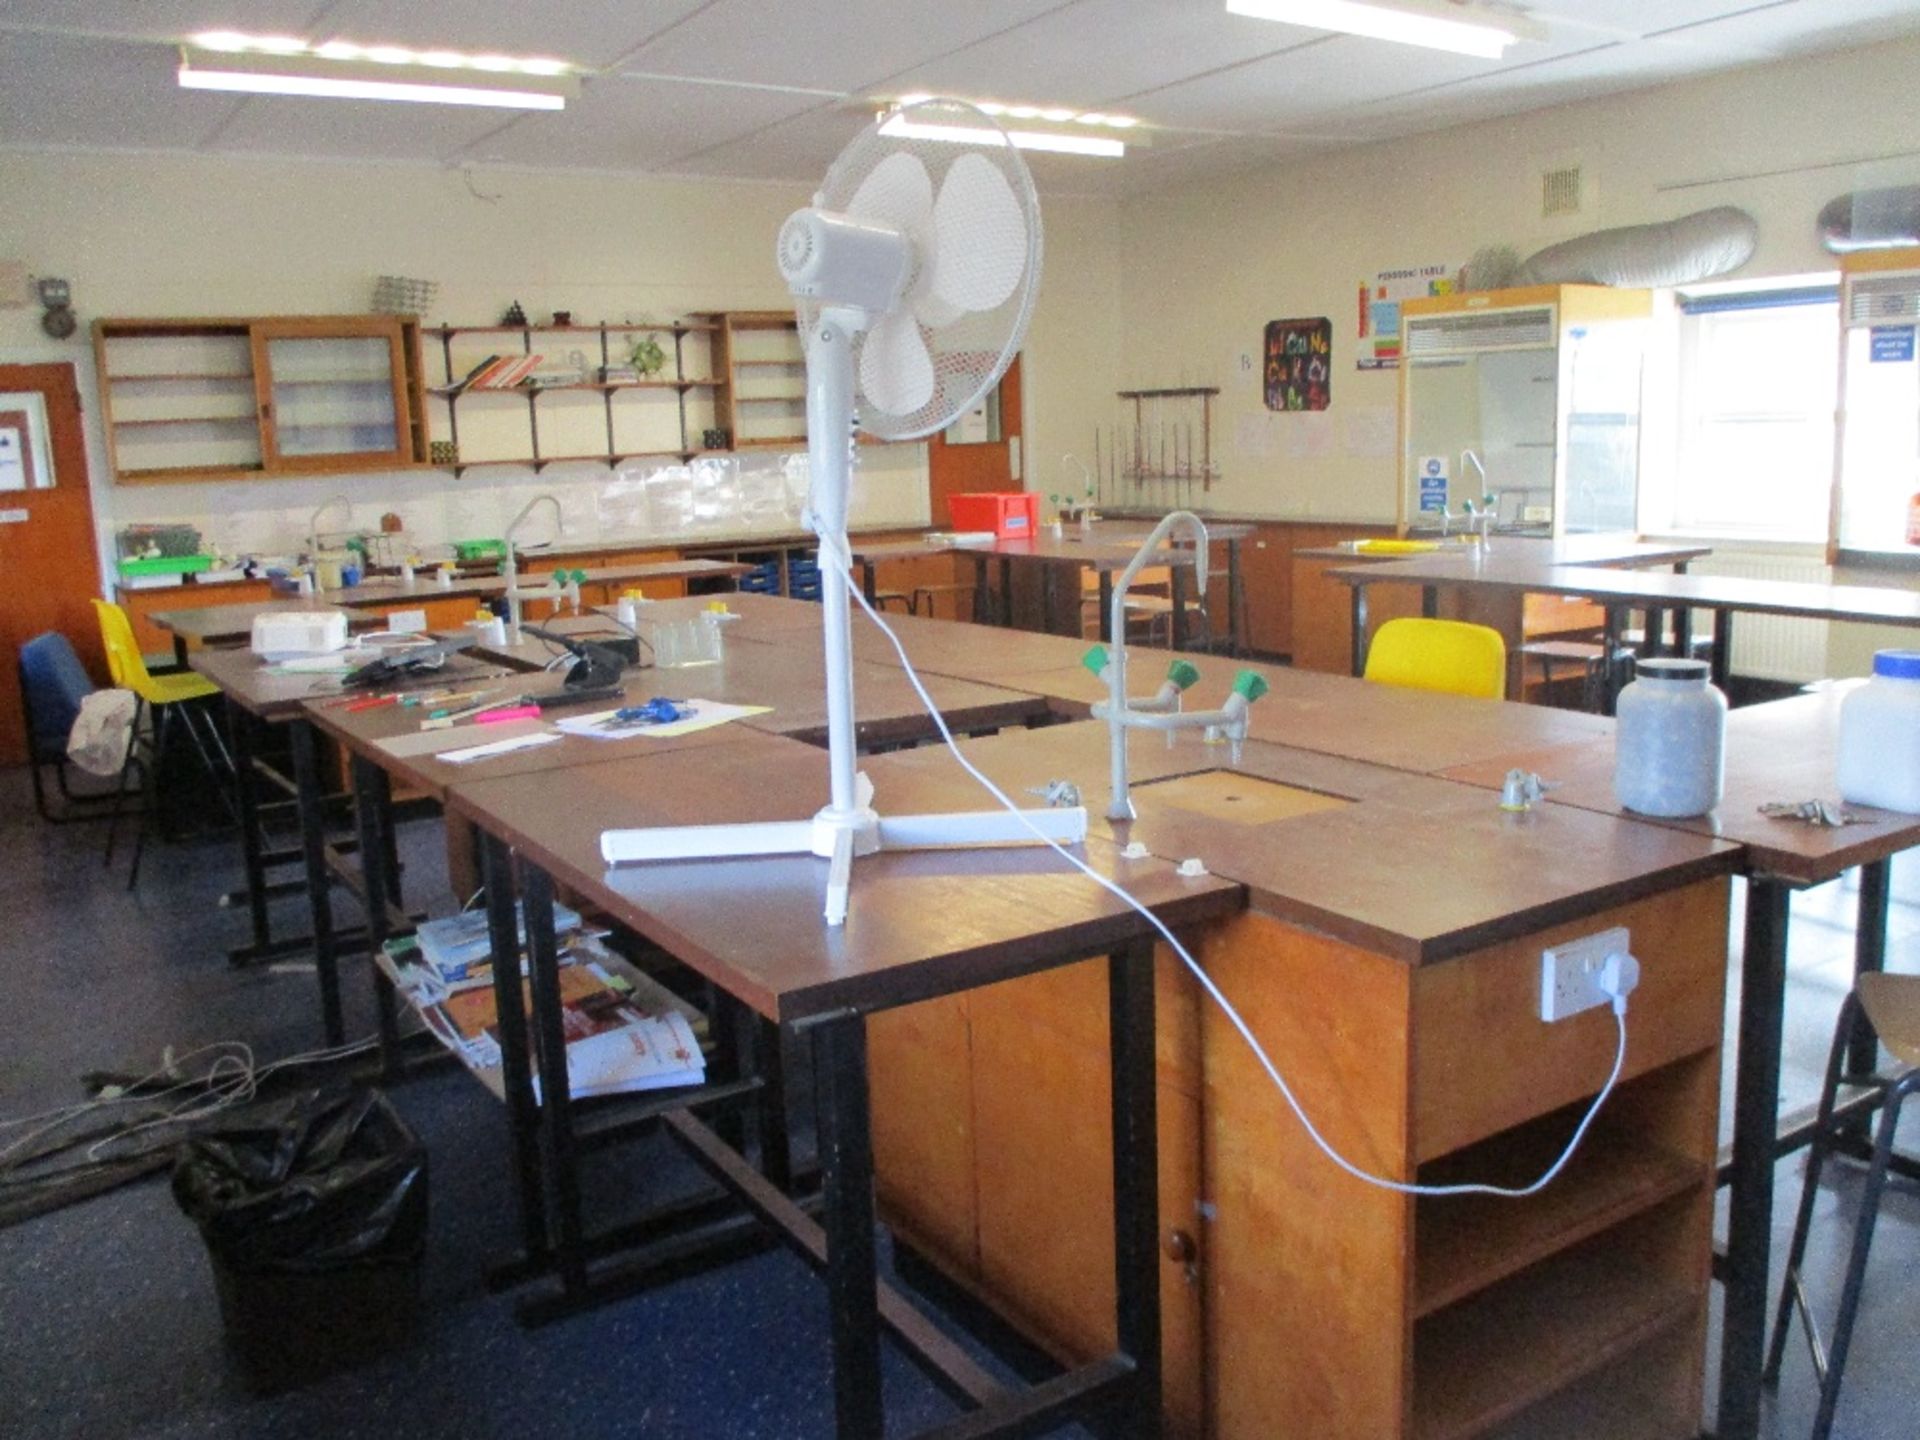 Contents of Classroom - Image 4 of 5